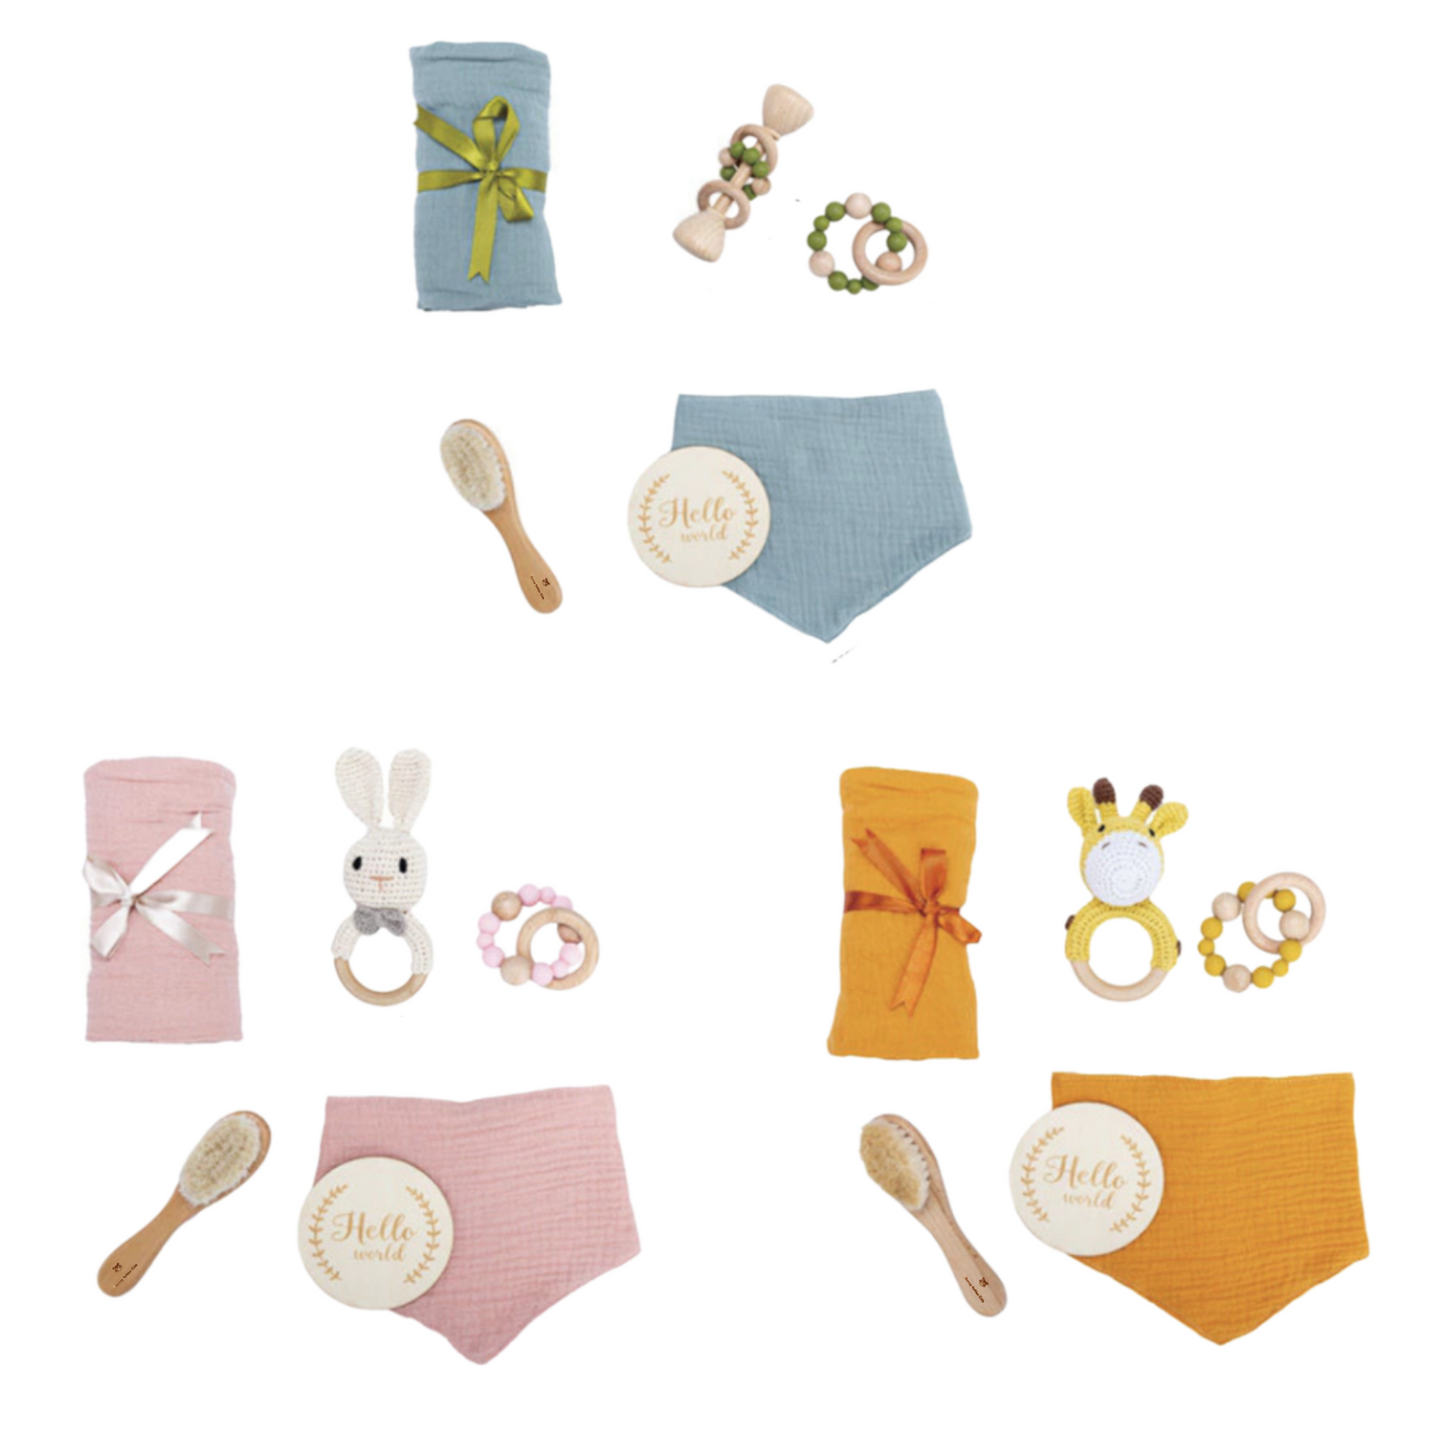 Newborn baby gift sets with three different colors with cloth bibs, swaddle, brush and rattles